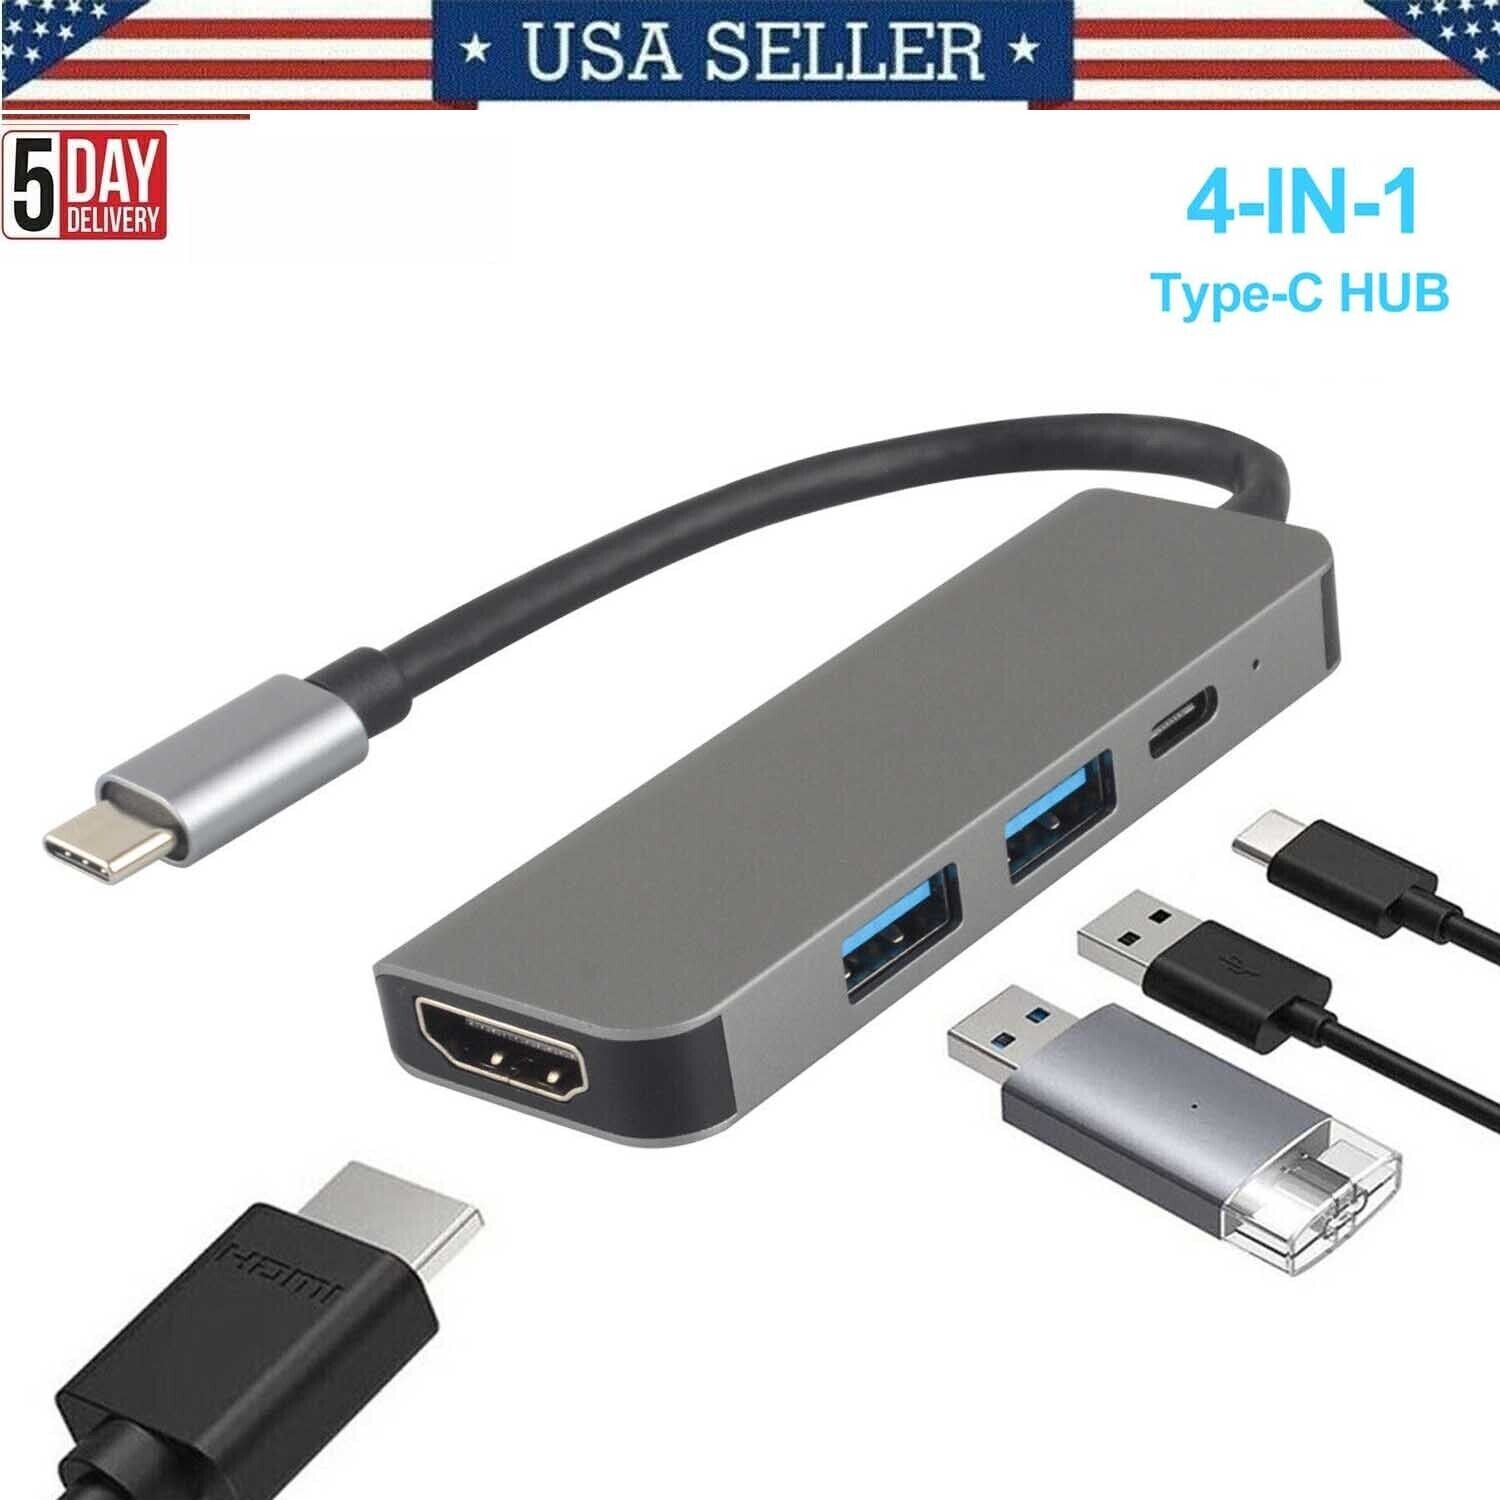 4 in 1 Multifunction Type-C HUB To 4K HDMI USB 3.0 PD Charging Port Adapter USA